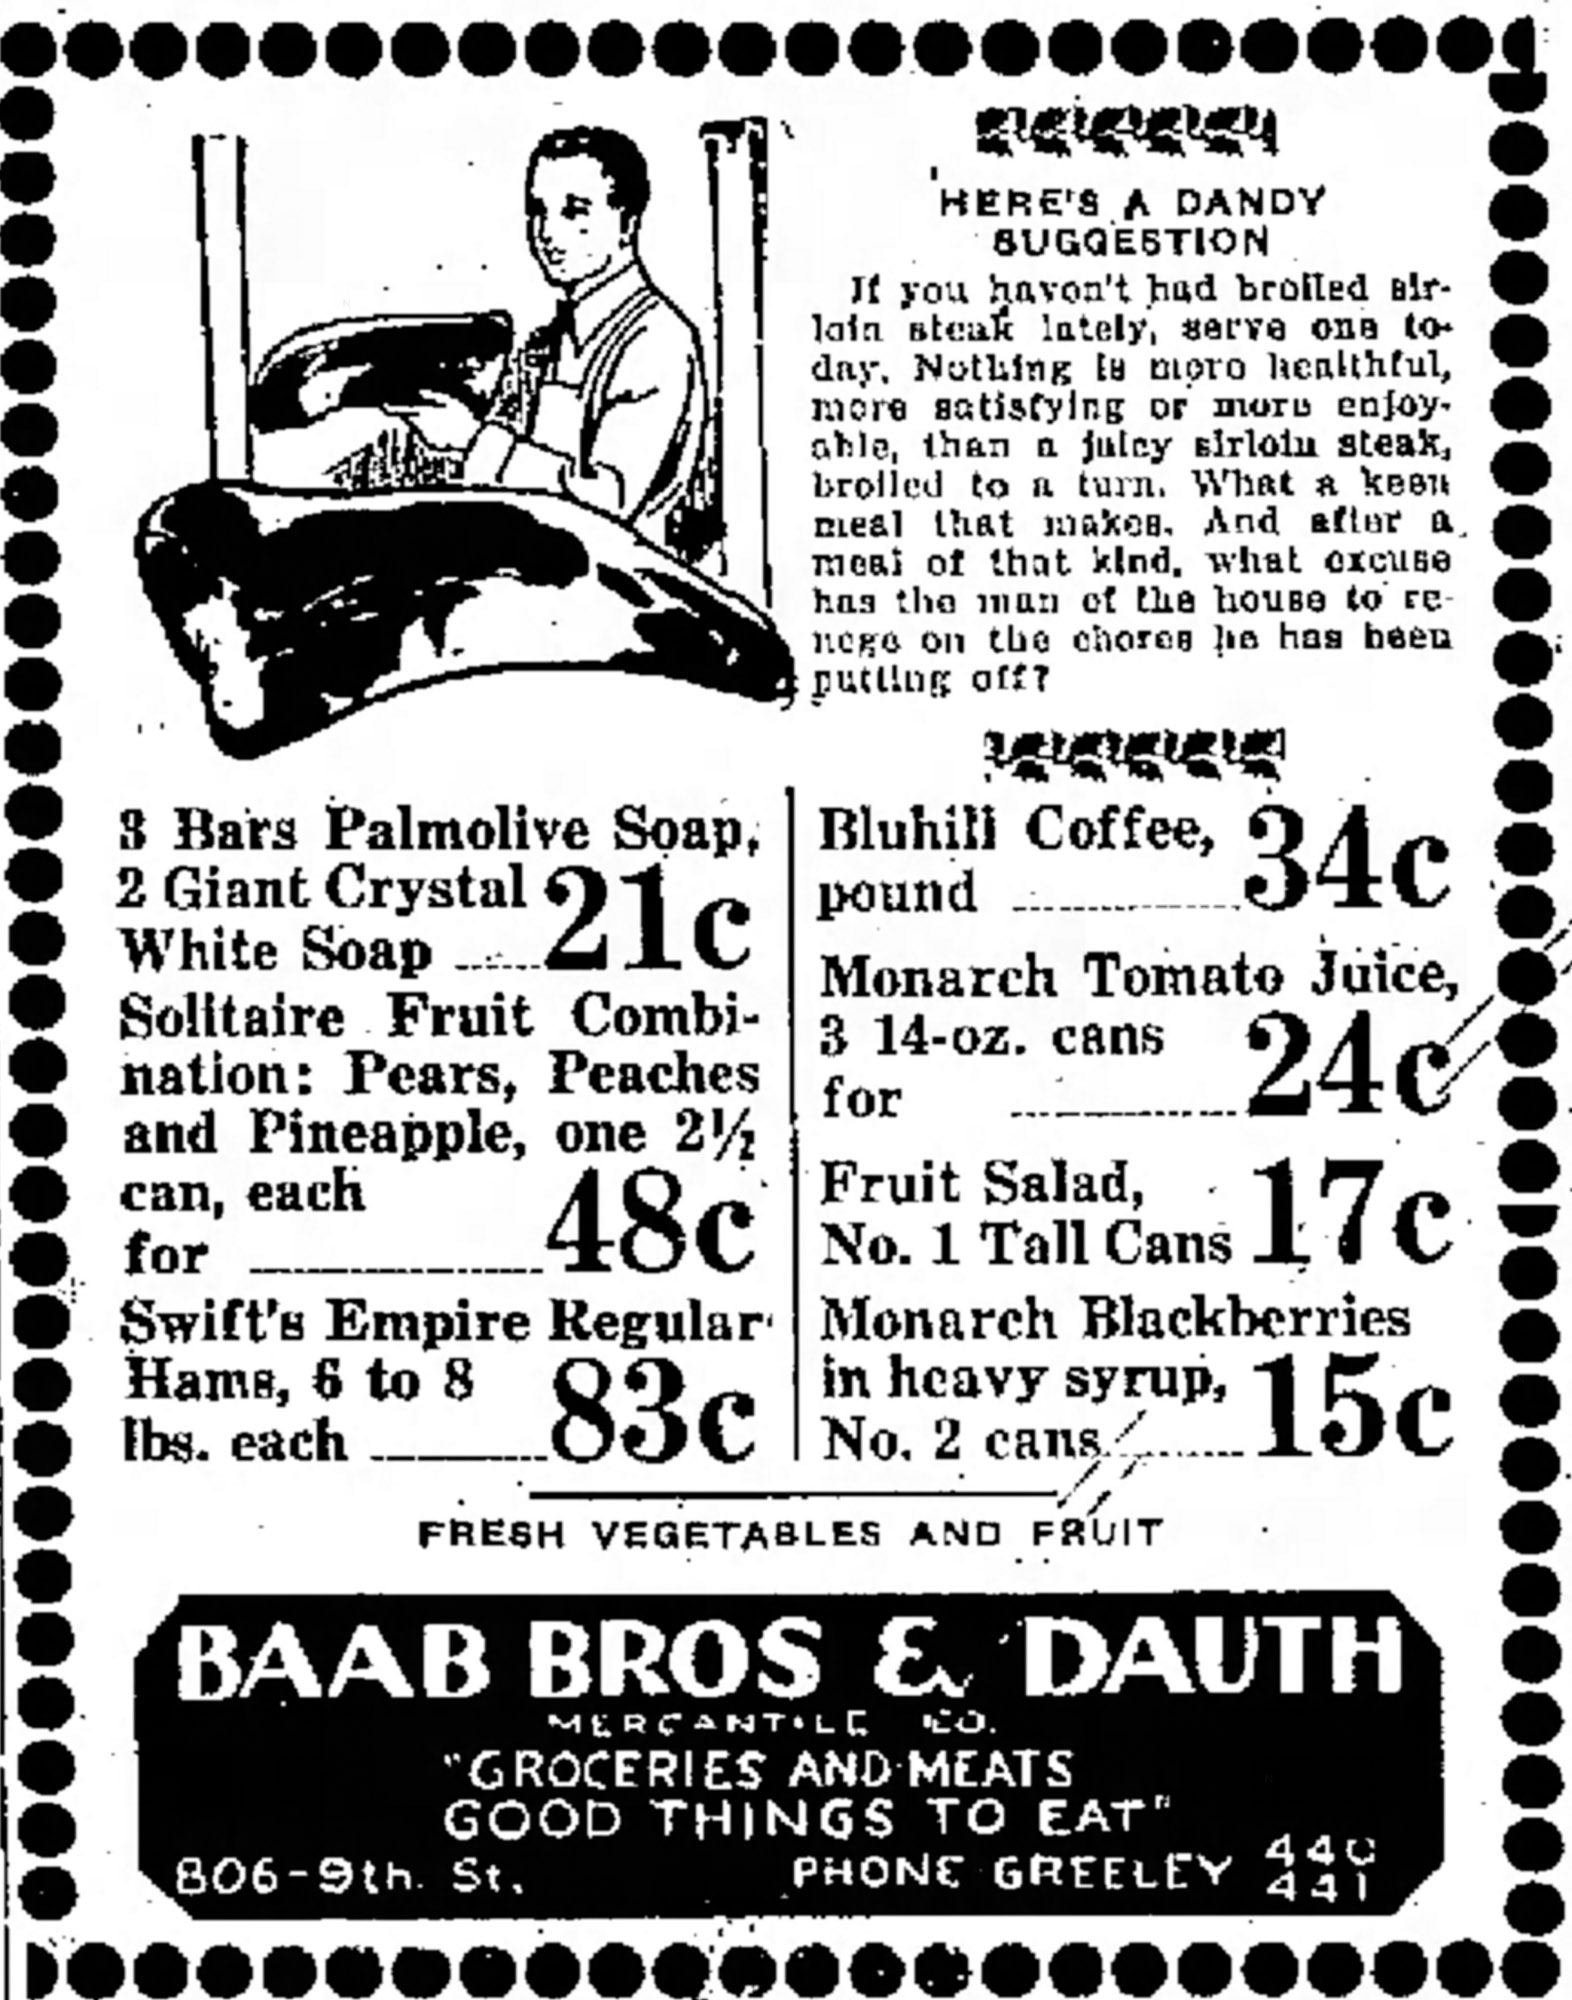 Dauth Family Archive - 1932-12-09 - Greeley Daily Tribune - Baab Bros and Dauth Advertisement